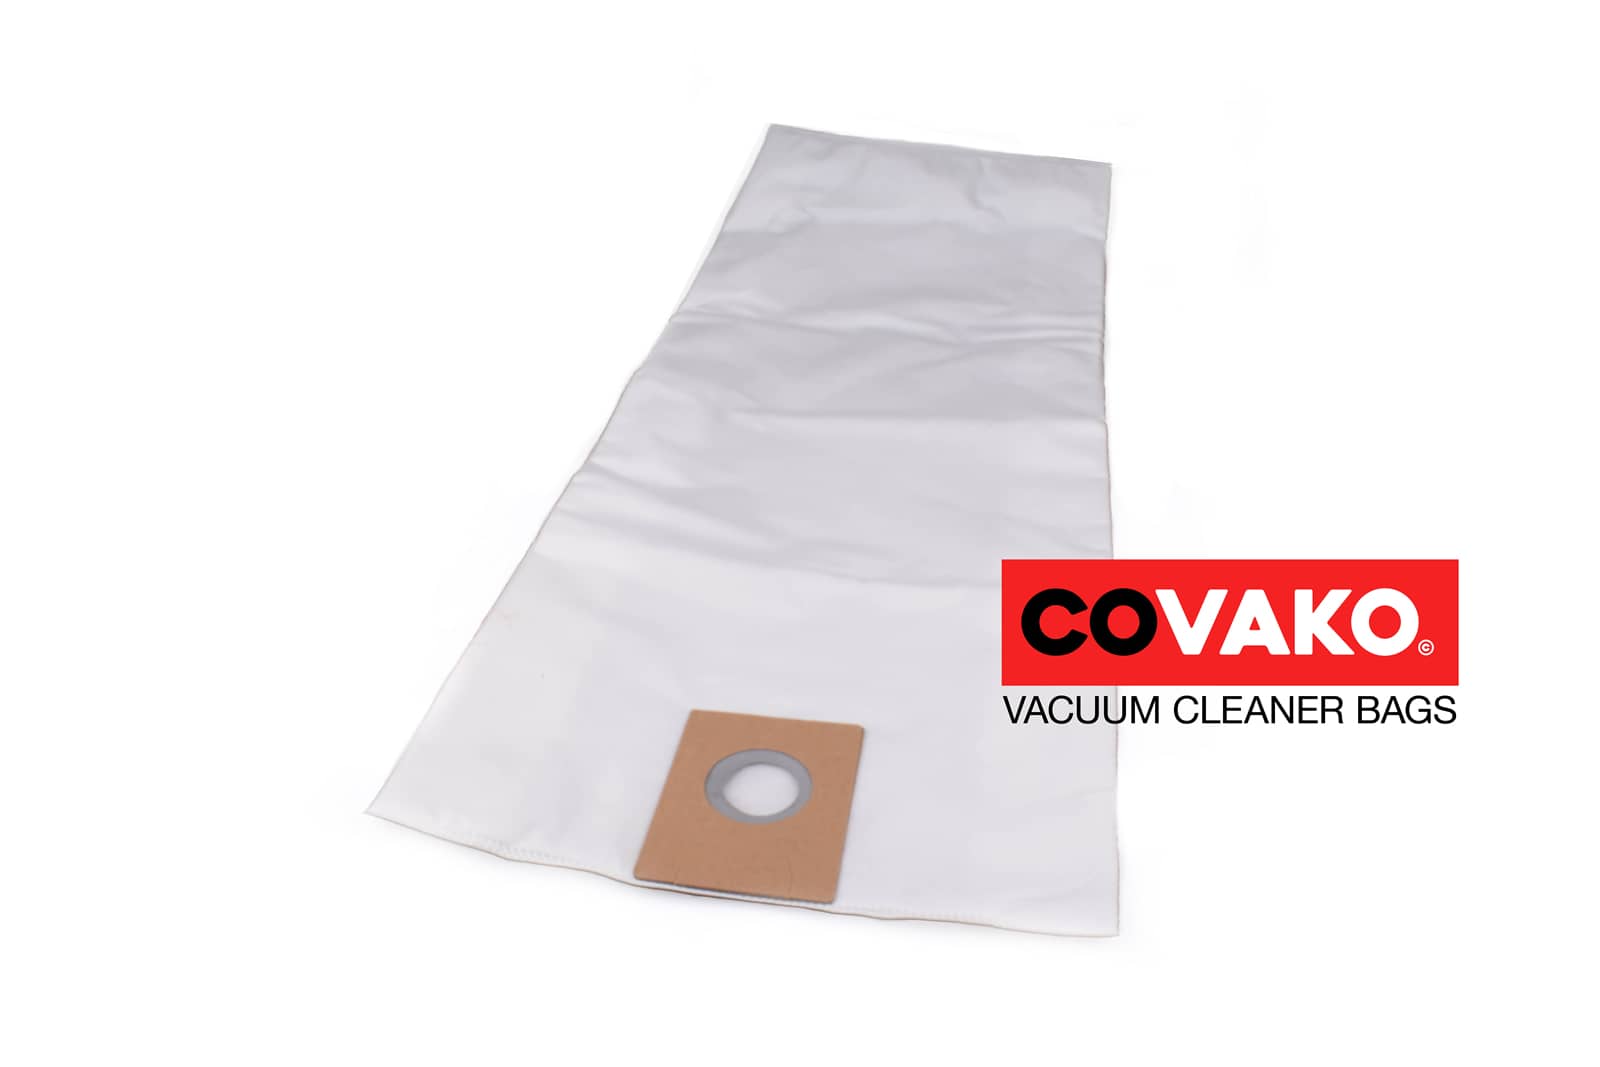 Viper LSU 395 / Synthesis - Viper vacuum cleaner bags